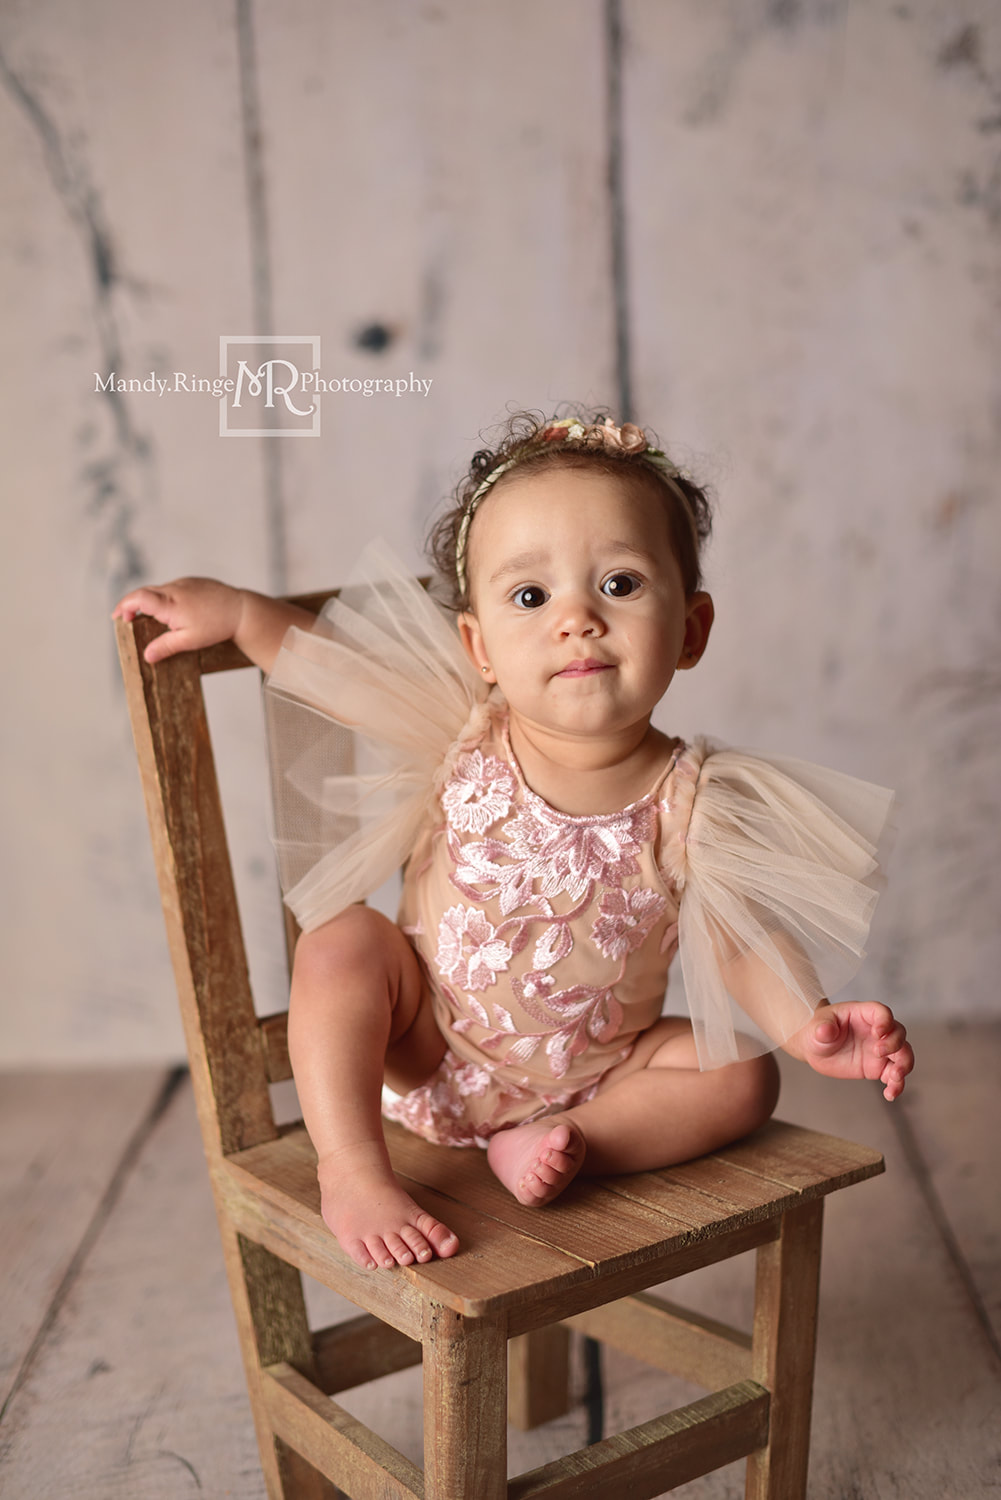 Milestone Session // Girl sitter session, 6 to 12 months,romper from Cora & Violet, Backdrop from Intuitions Backdrops // St. Charles, IL studio // Mandy Ringe Photography